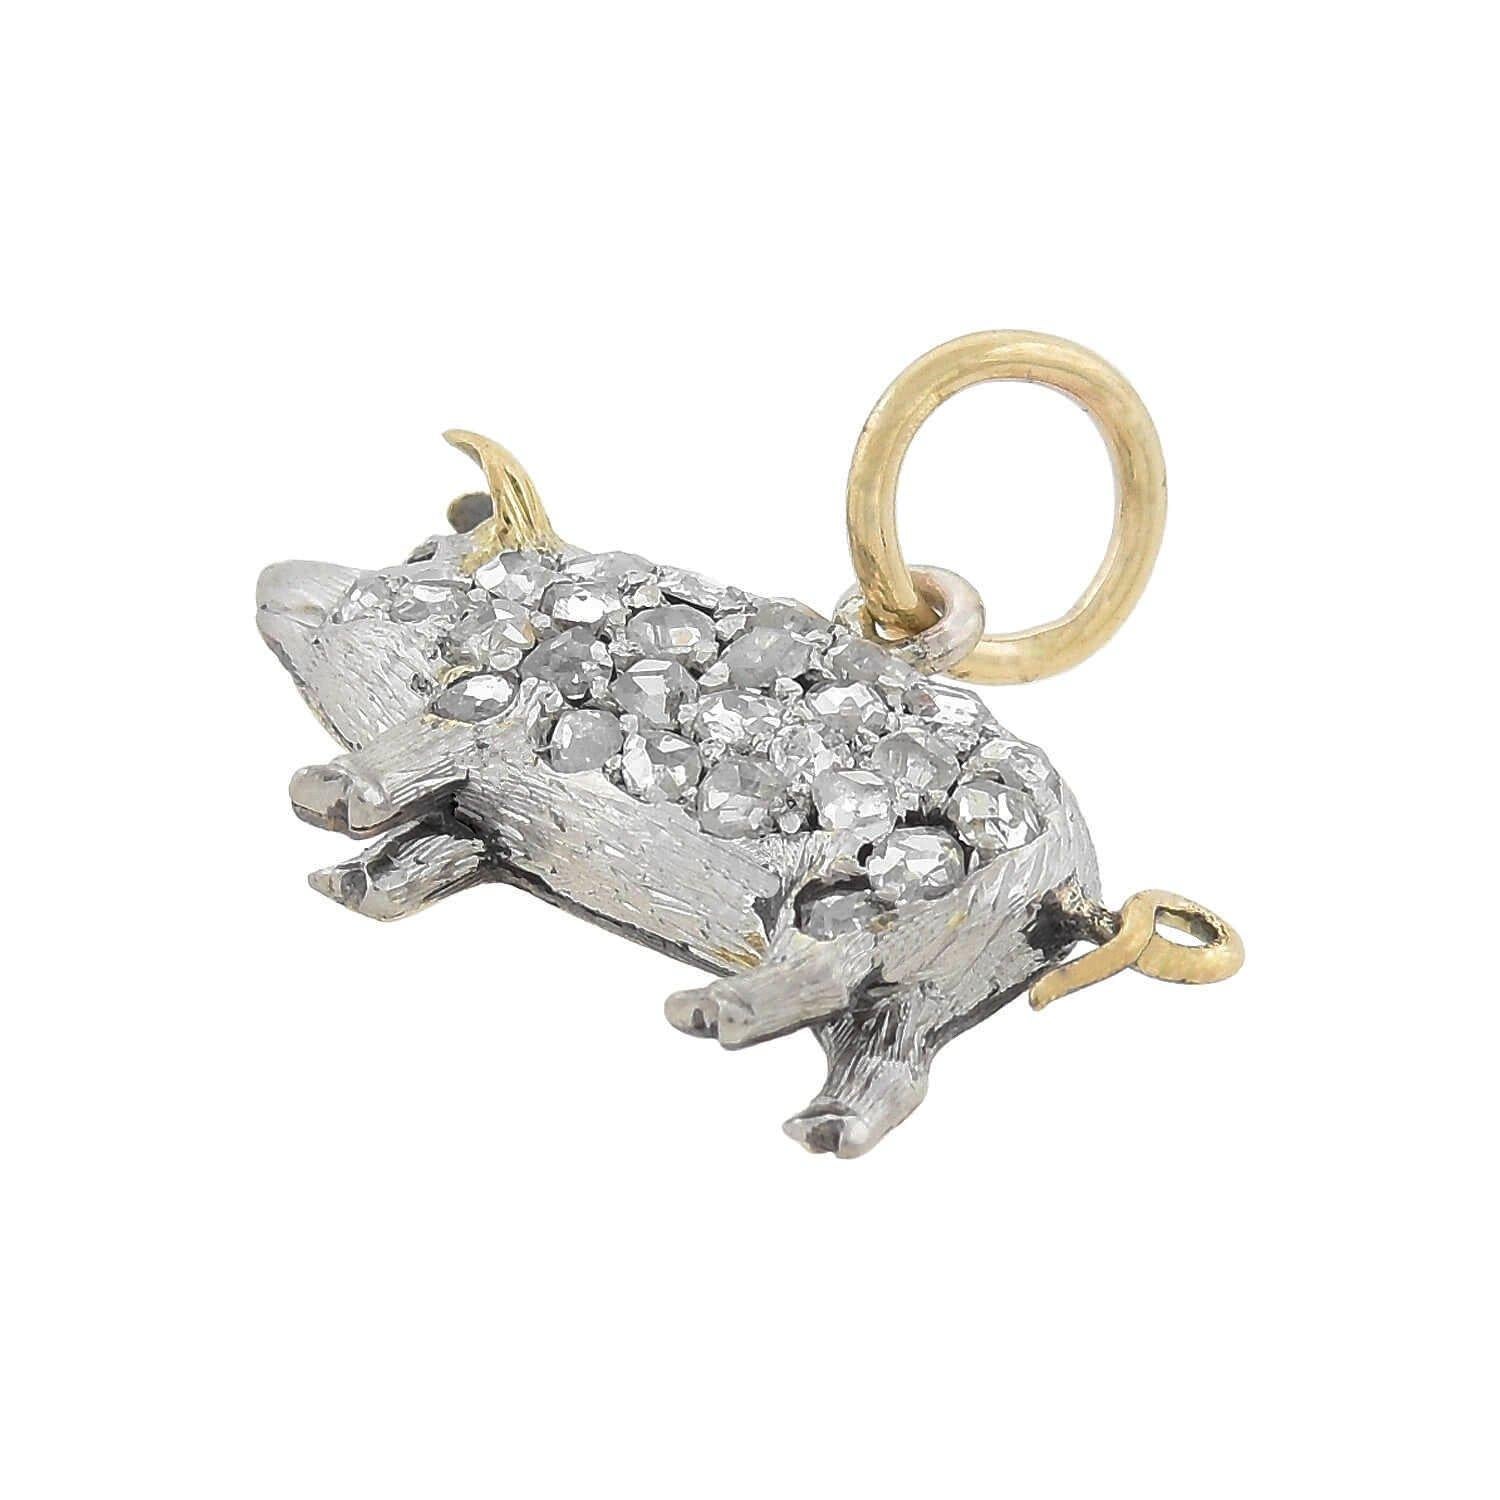 An absolutely lovely diamond pig charm pendant from the Edwardian (ca1910s) era! This wonderful piece is crafted of platinum-topped 15kt yellow gold and portrays a petite potbelly pig, whose body is encrusted with sparkling old Rose Cut diamonds.